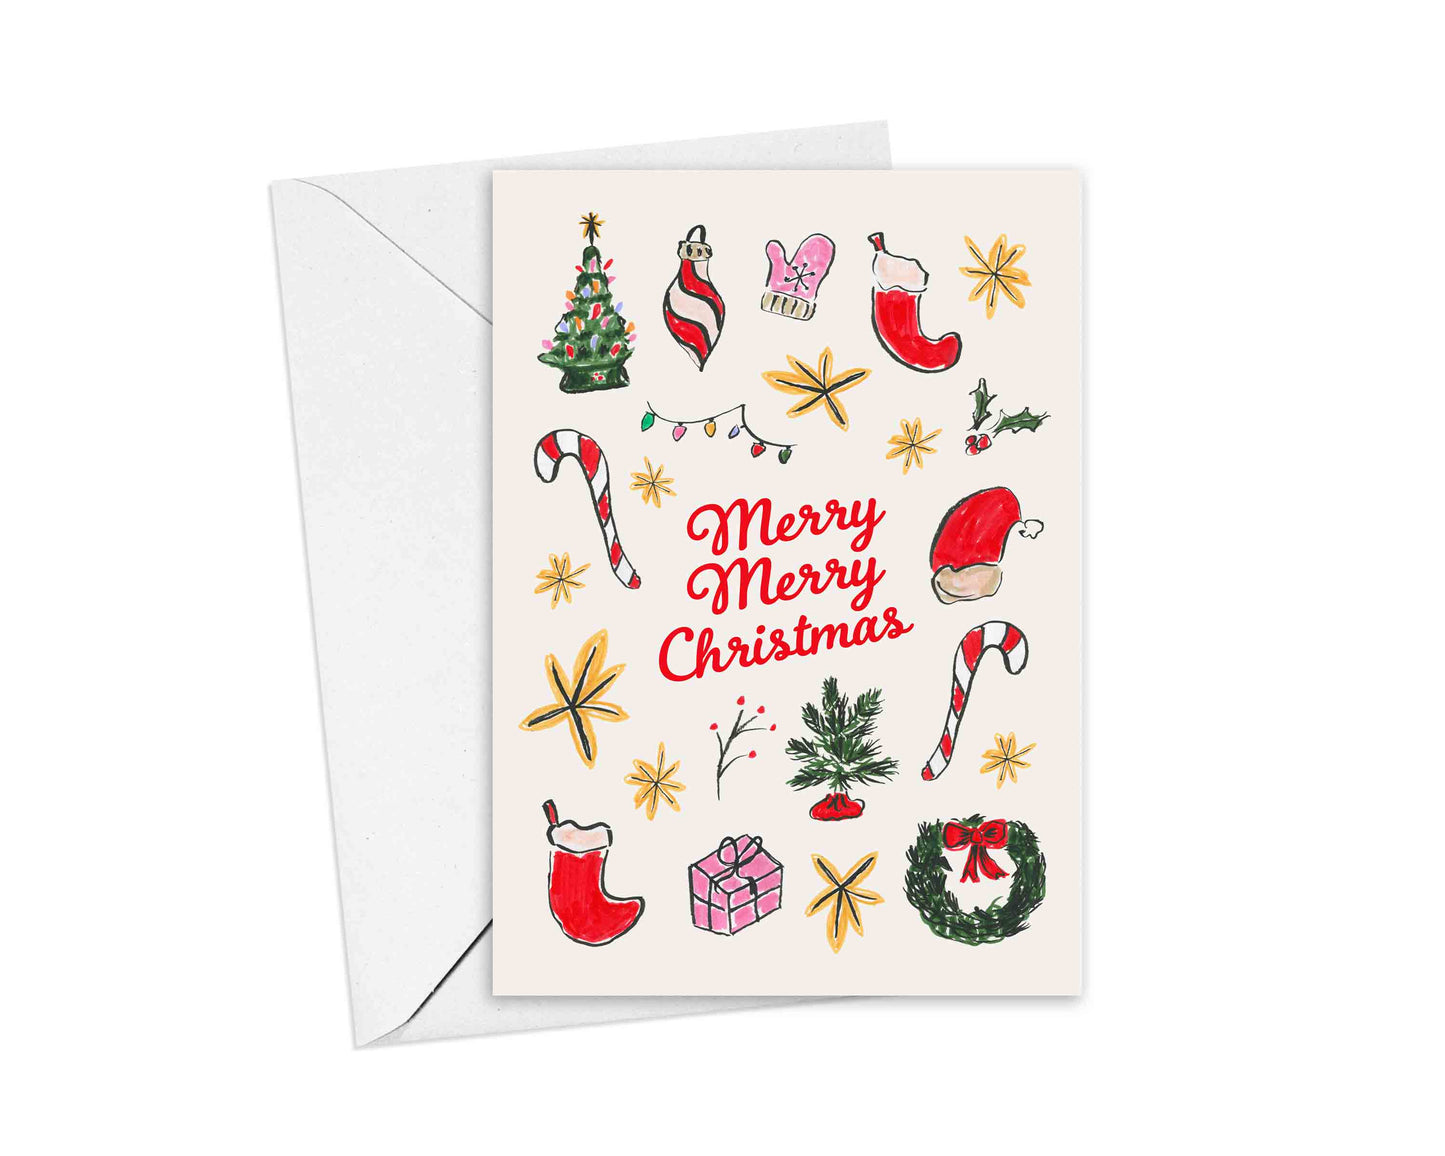 Merry Merry Christmas Stationery Cards